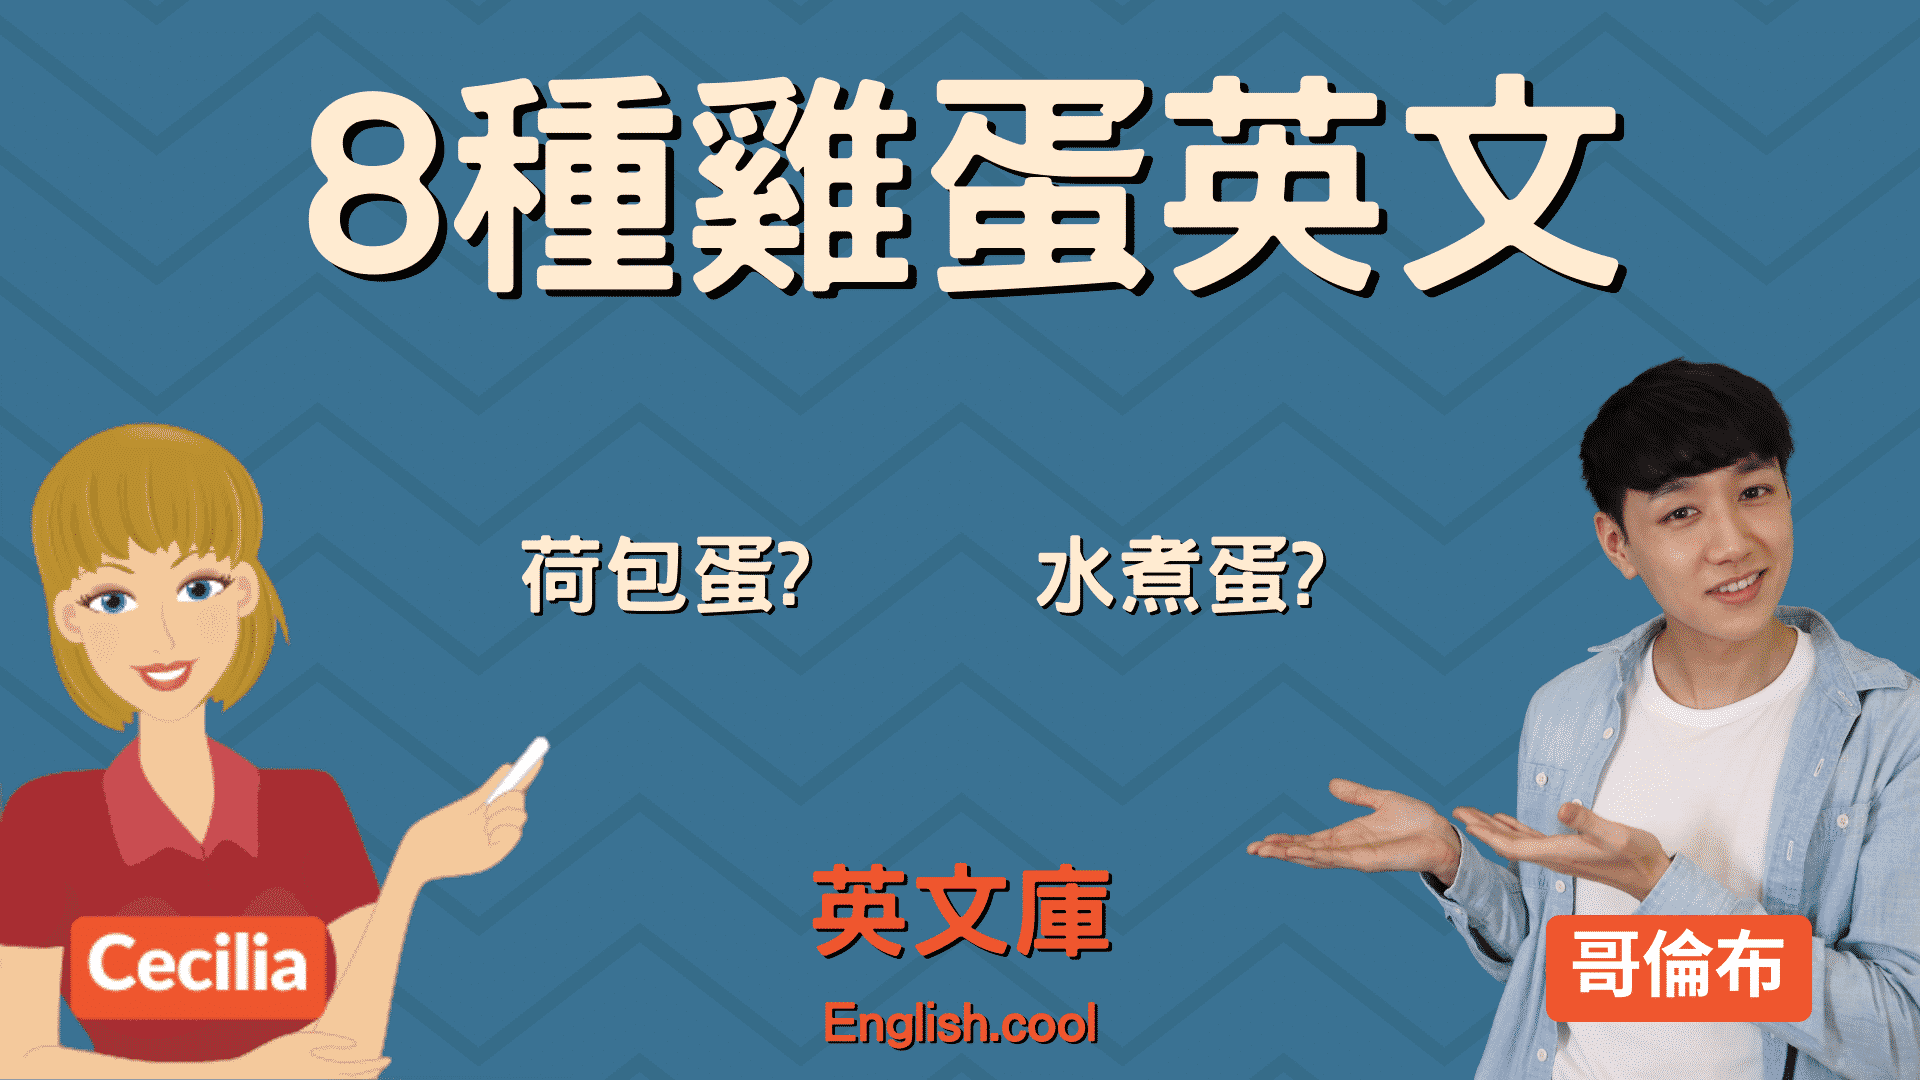 You are currently viewing 【8雞蛋煮法英文】荷包蛋？煎蛋？How do you like your eggs? 來一次搞懂！